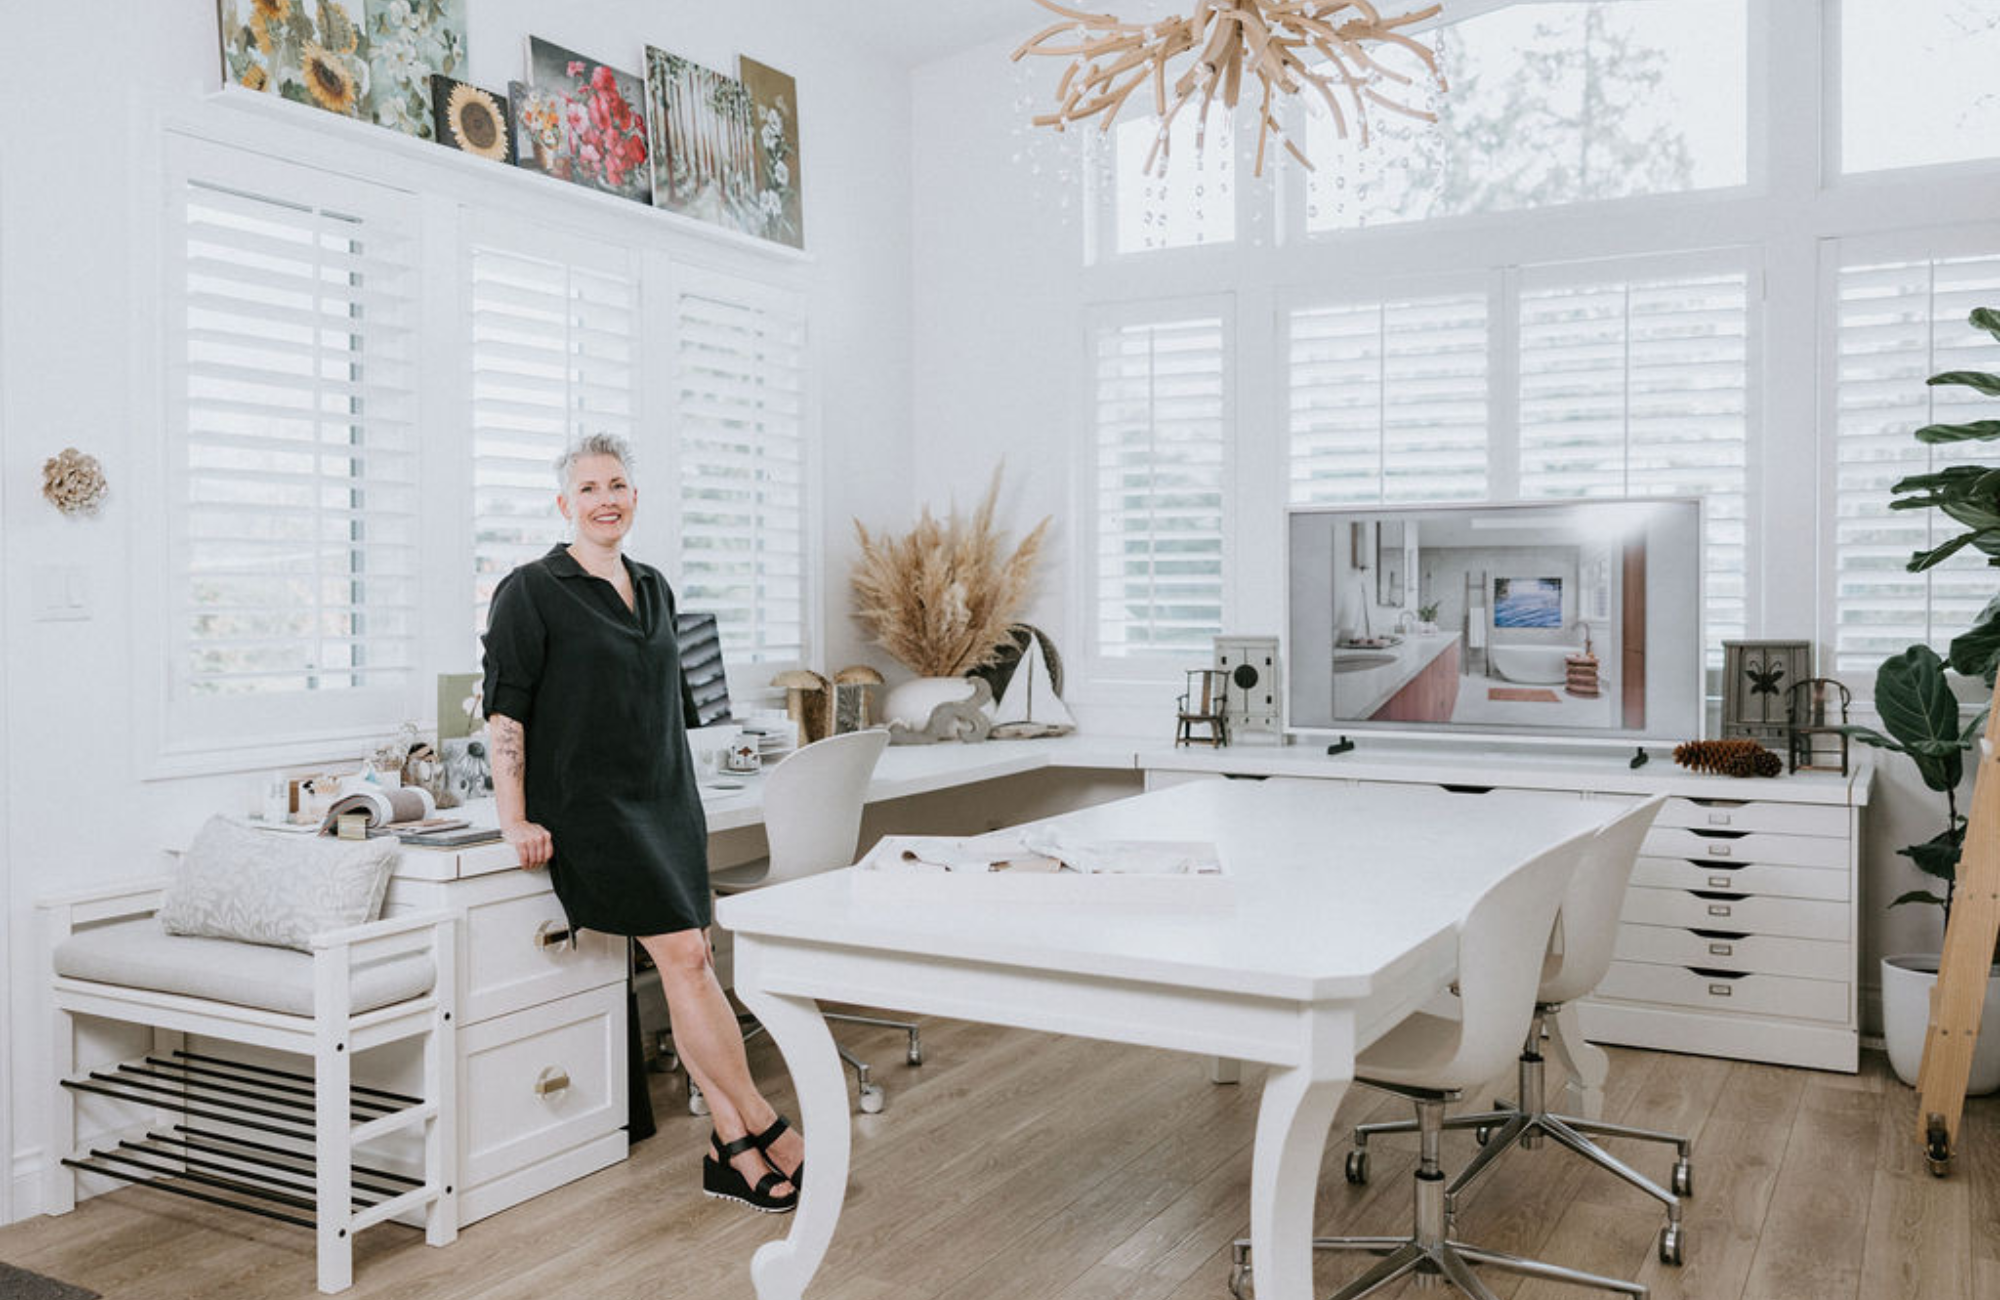 simply-home-decorating-blueridge-vancouver-lessons-in-entrepreneurship-lori-steeves-in-design-studio-samples-large-table-for-working-everyday-luxury-interior-design